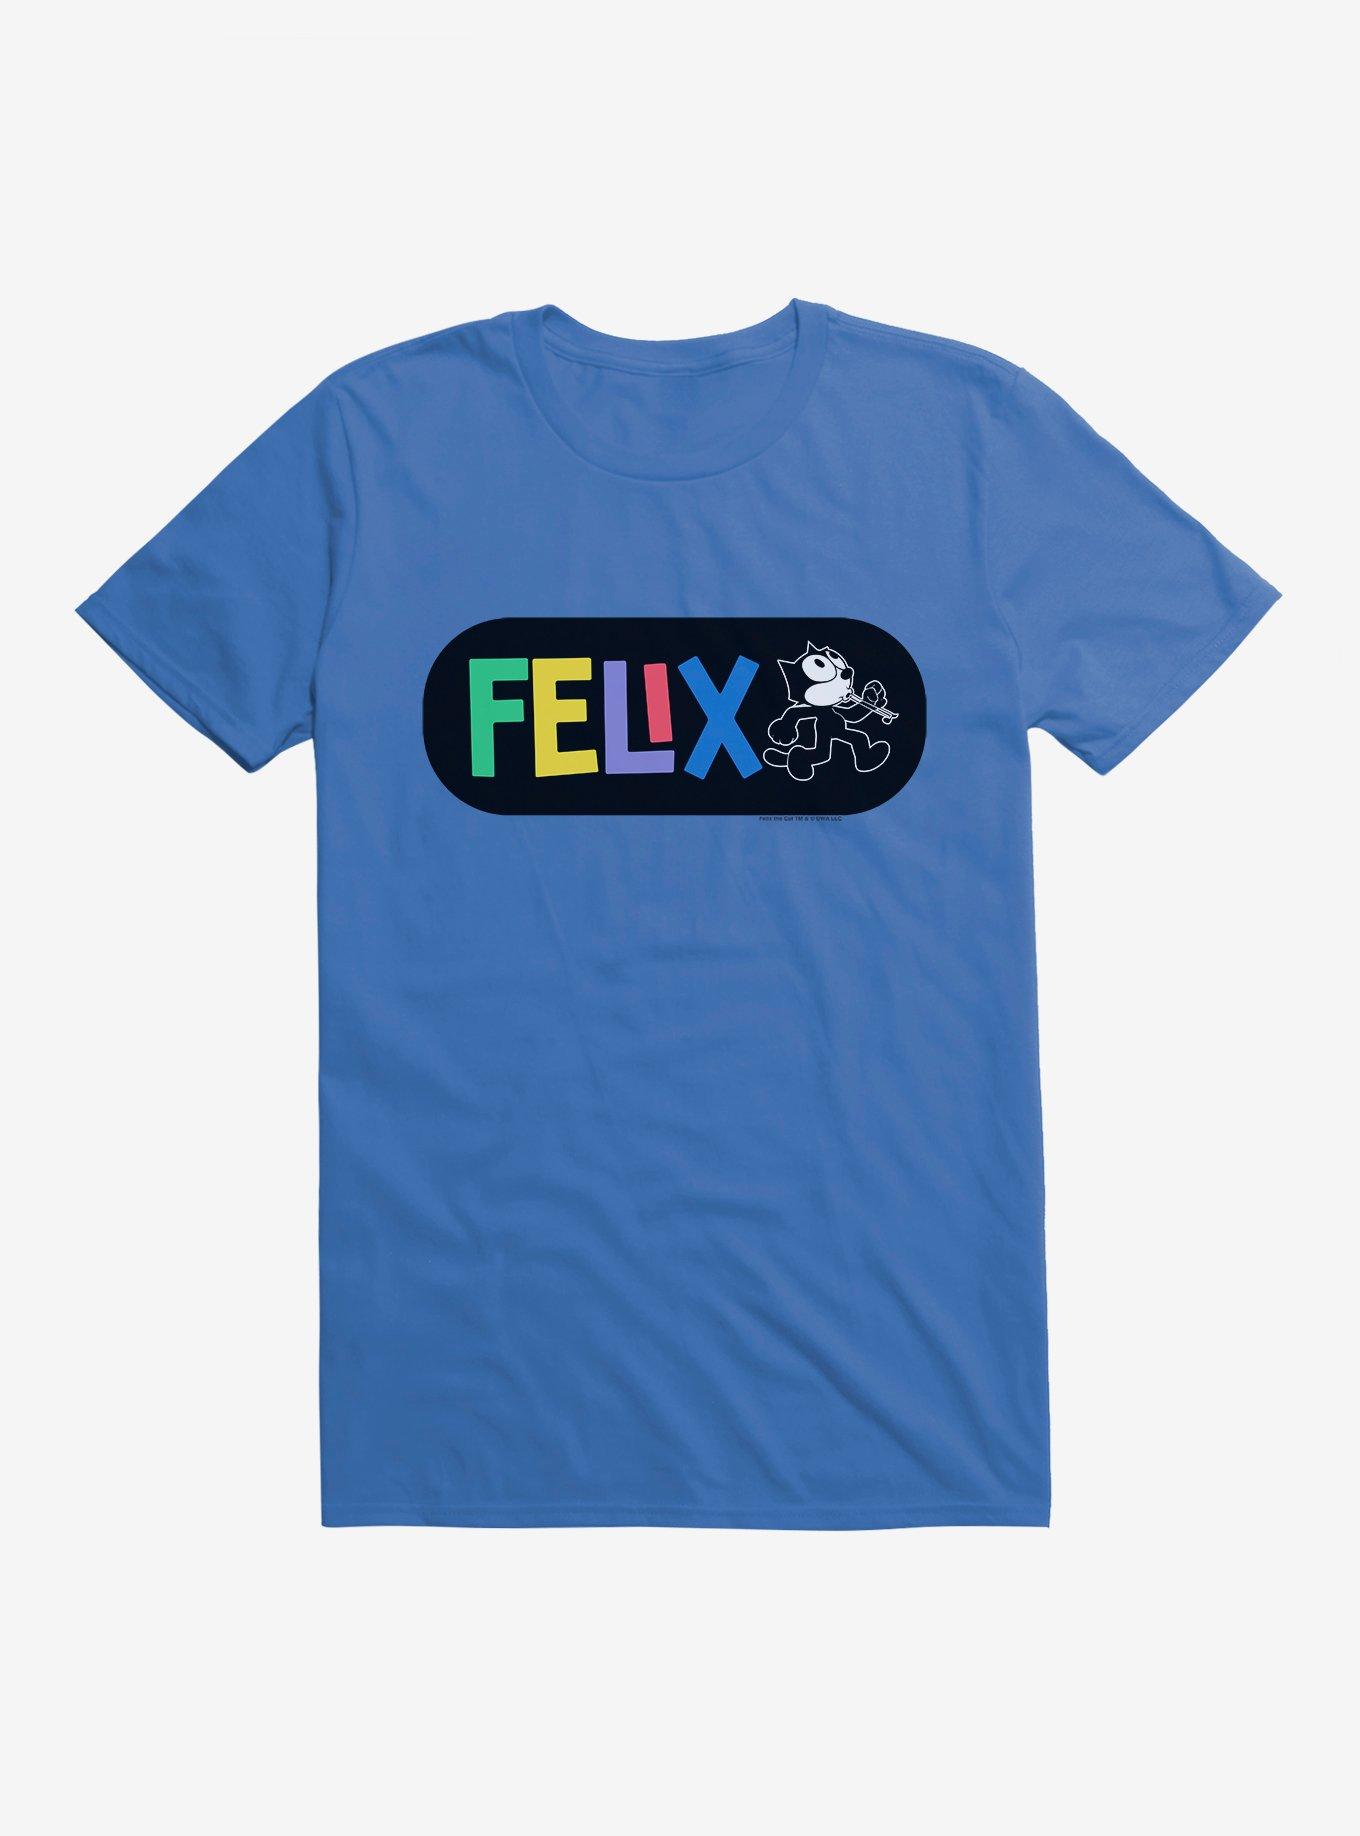 Felix The Cat Whistling And Walking T-Shirt, ROYAL BLUE, hi-res